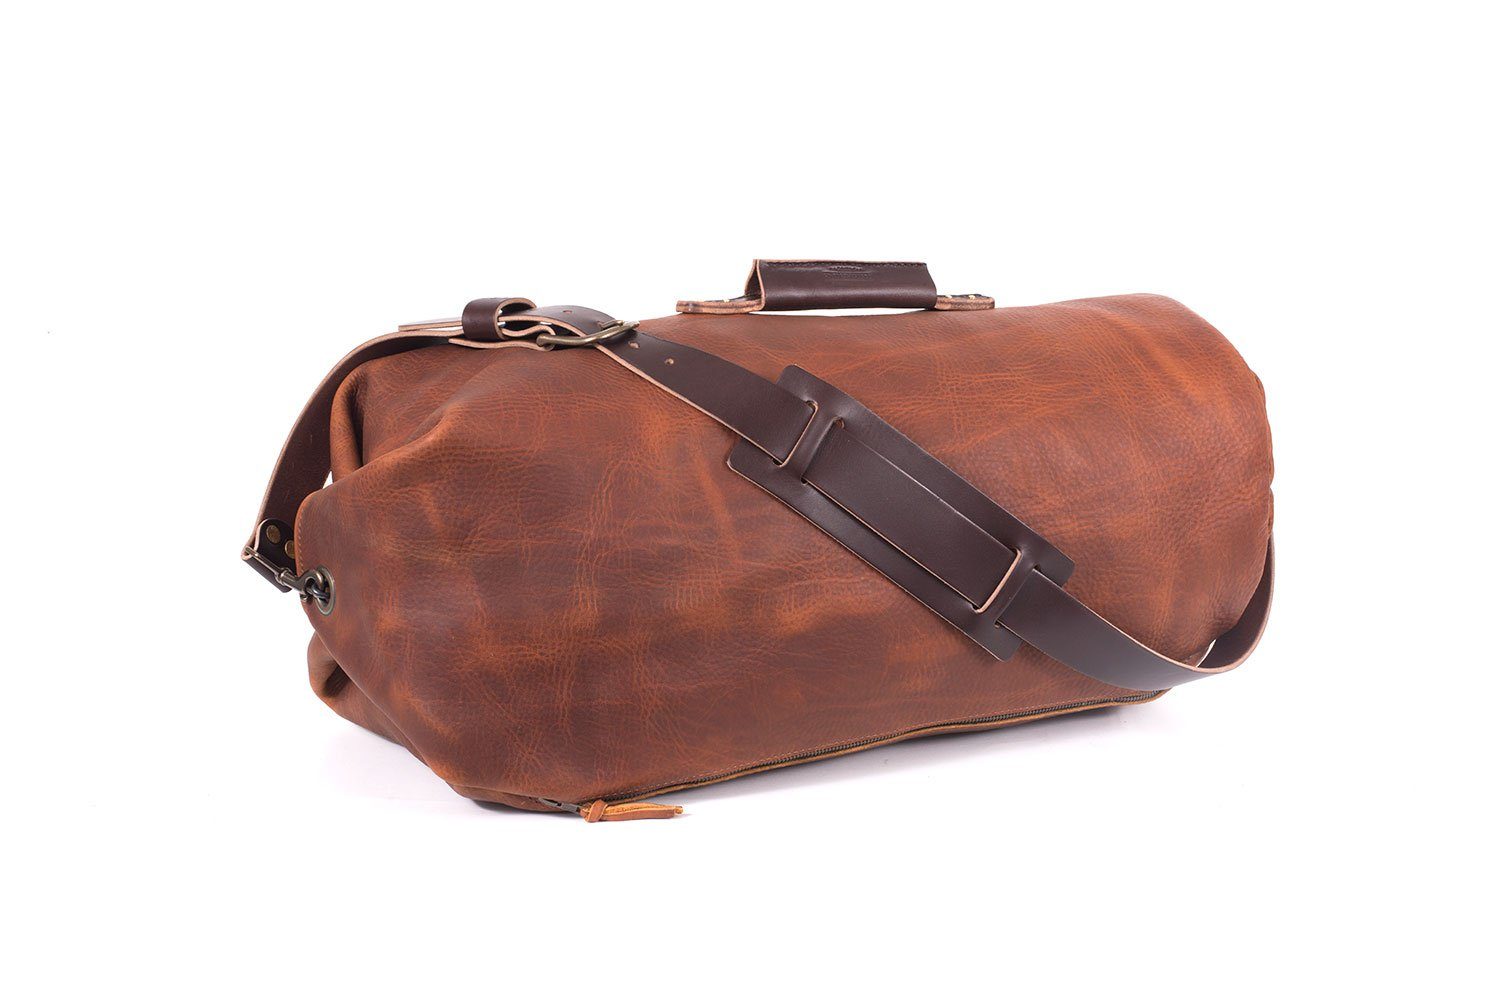 Personalized Leather Duffle Bag Large Leather Rucksack 